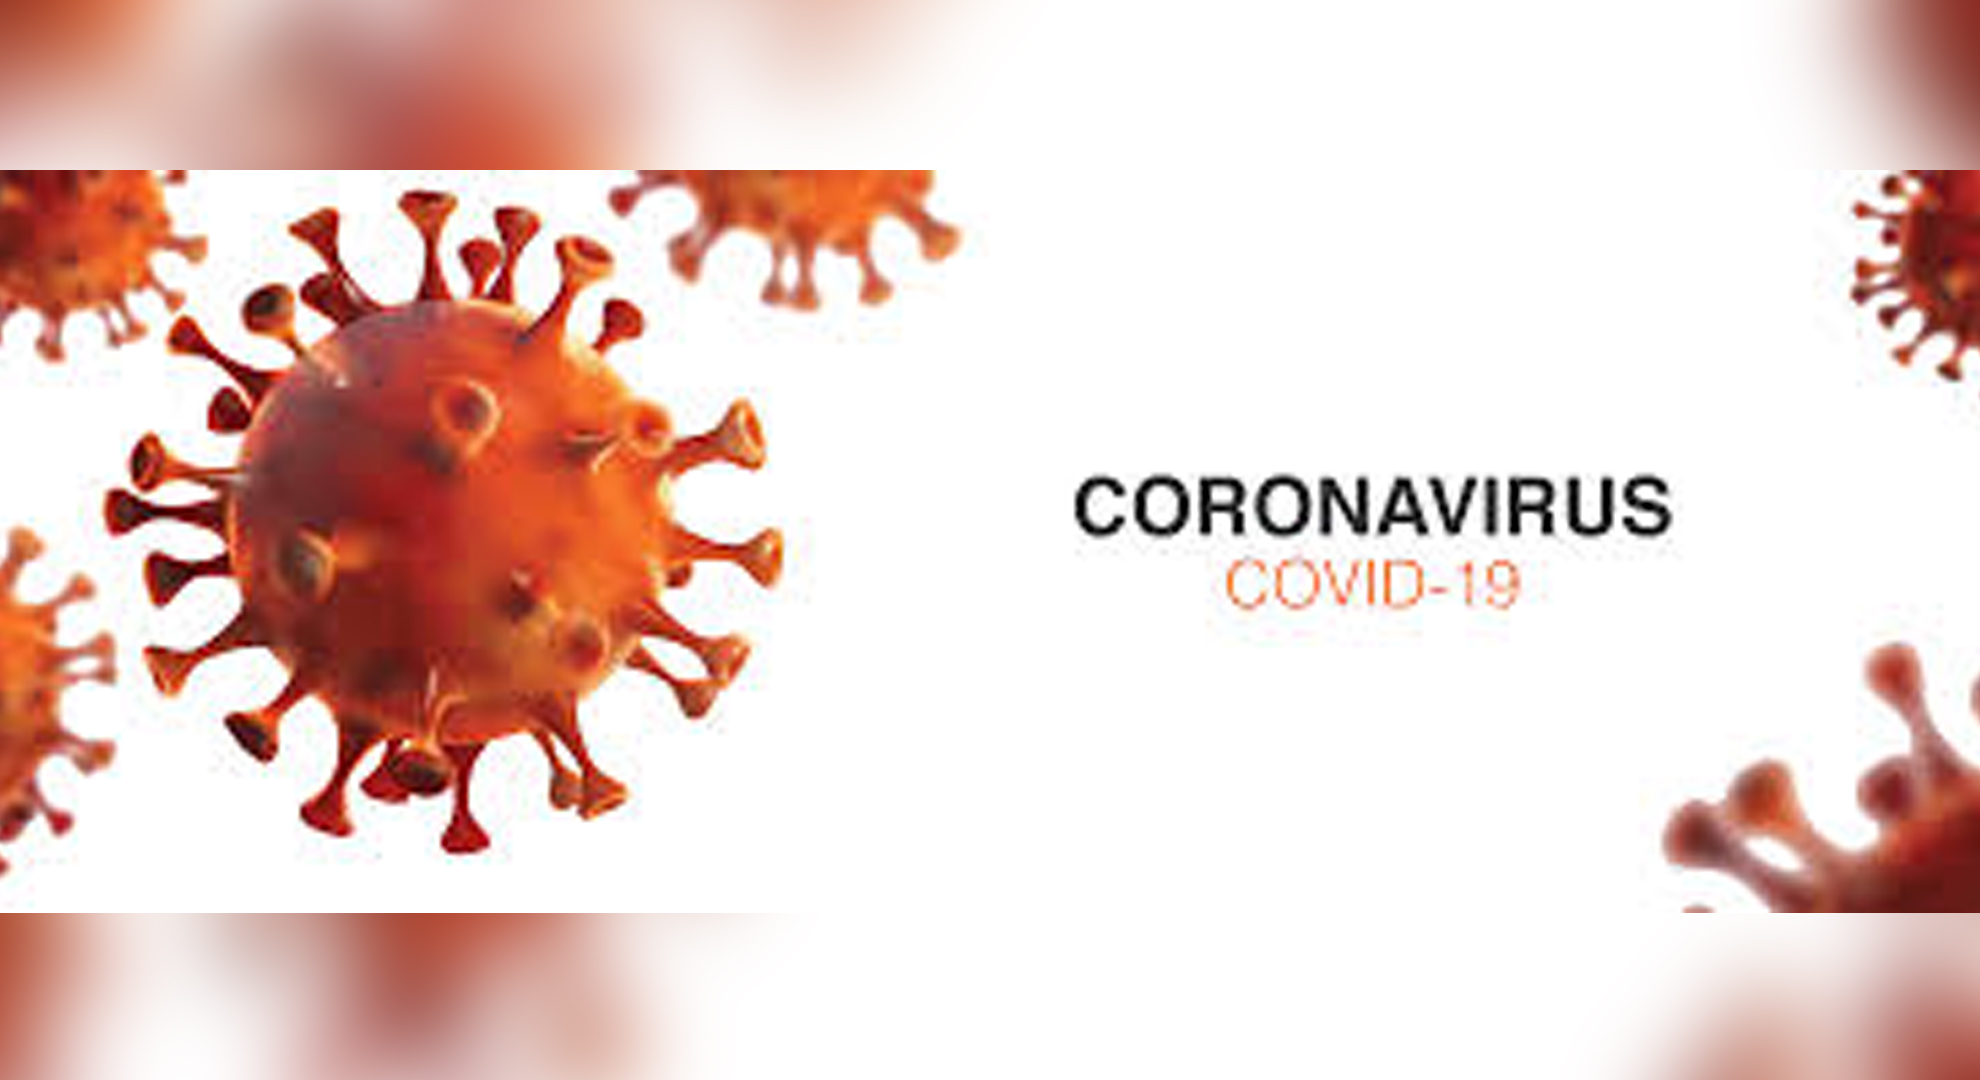 Coronavirus can stay on your shoes for 5 days or more, according to experts